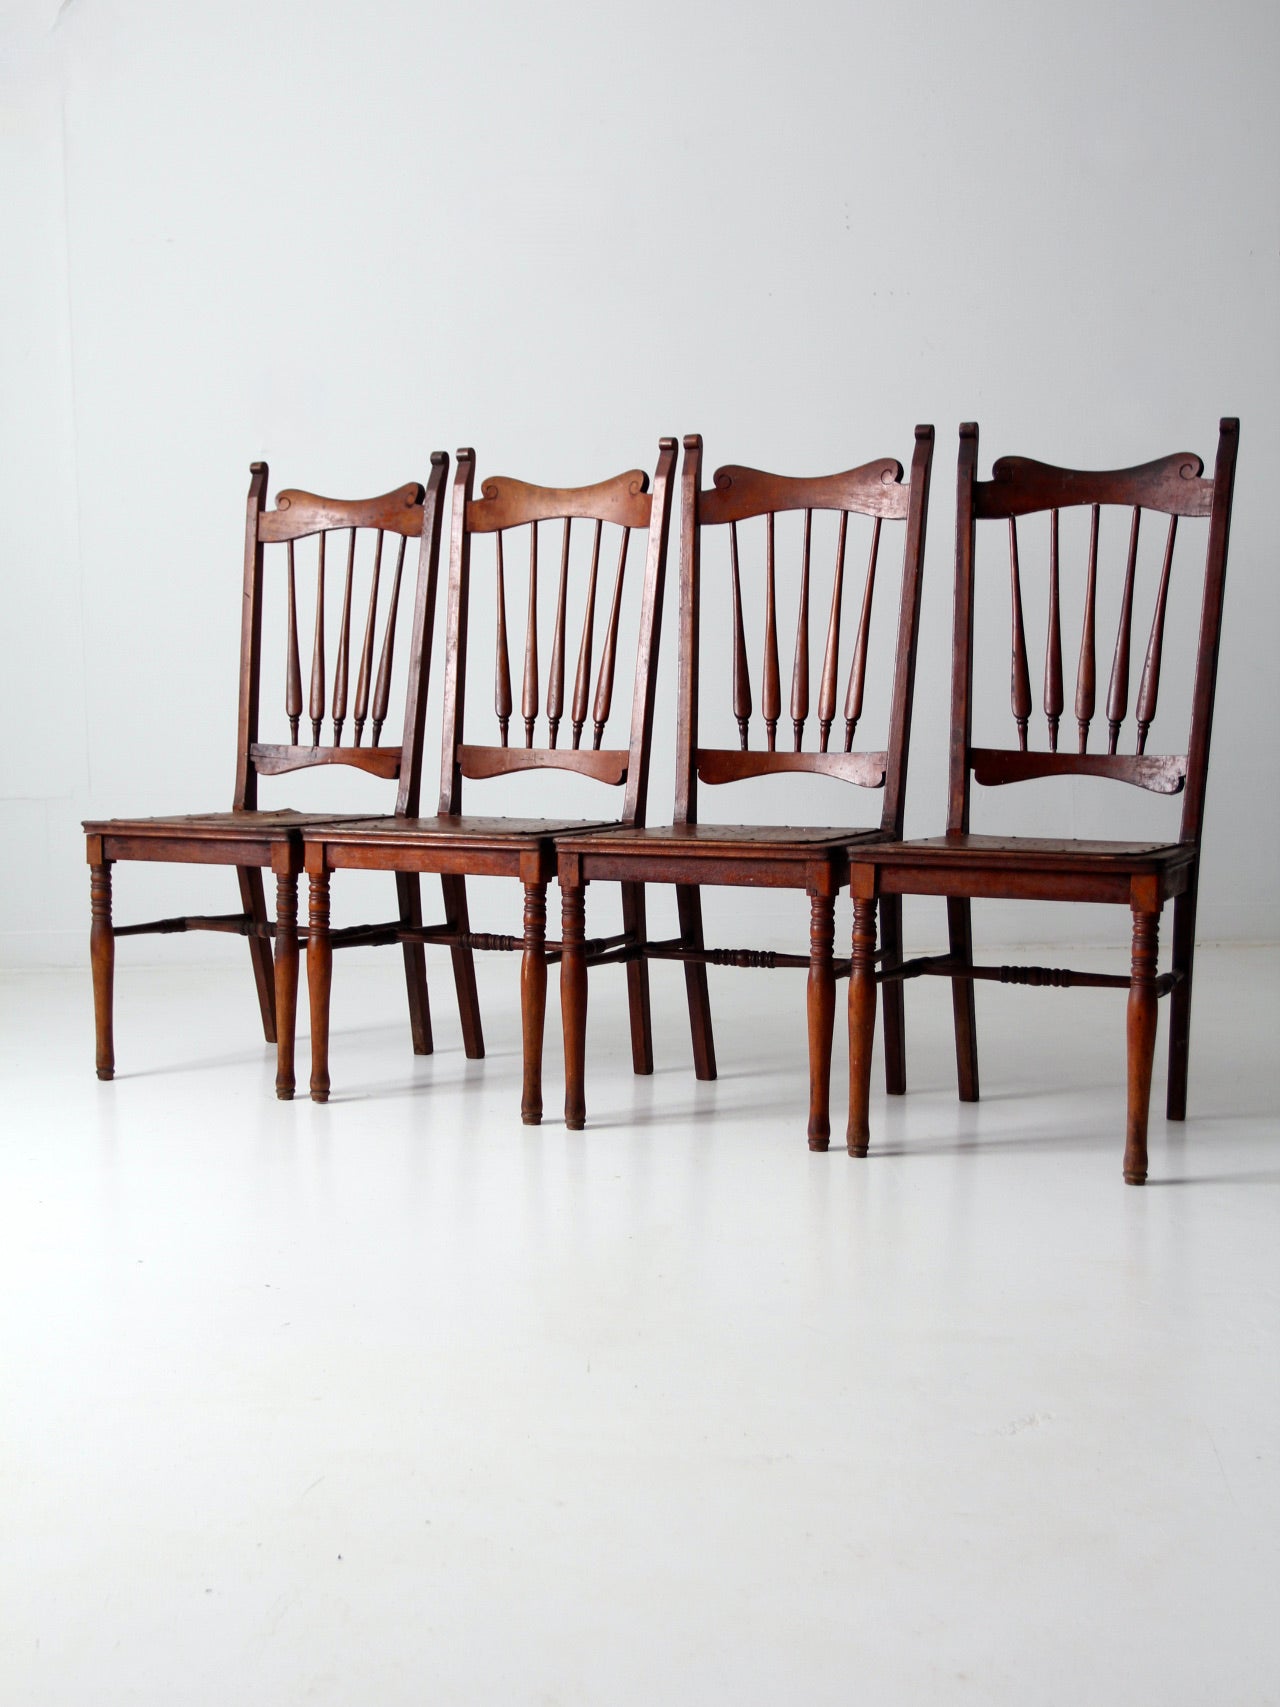 antique wooden dining chairs set/4